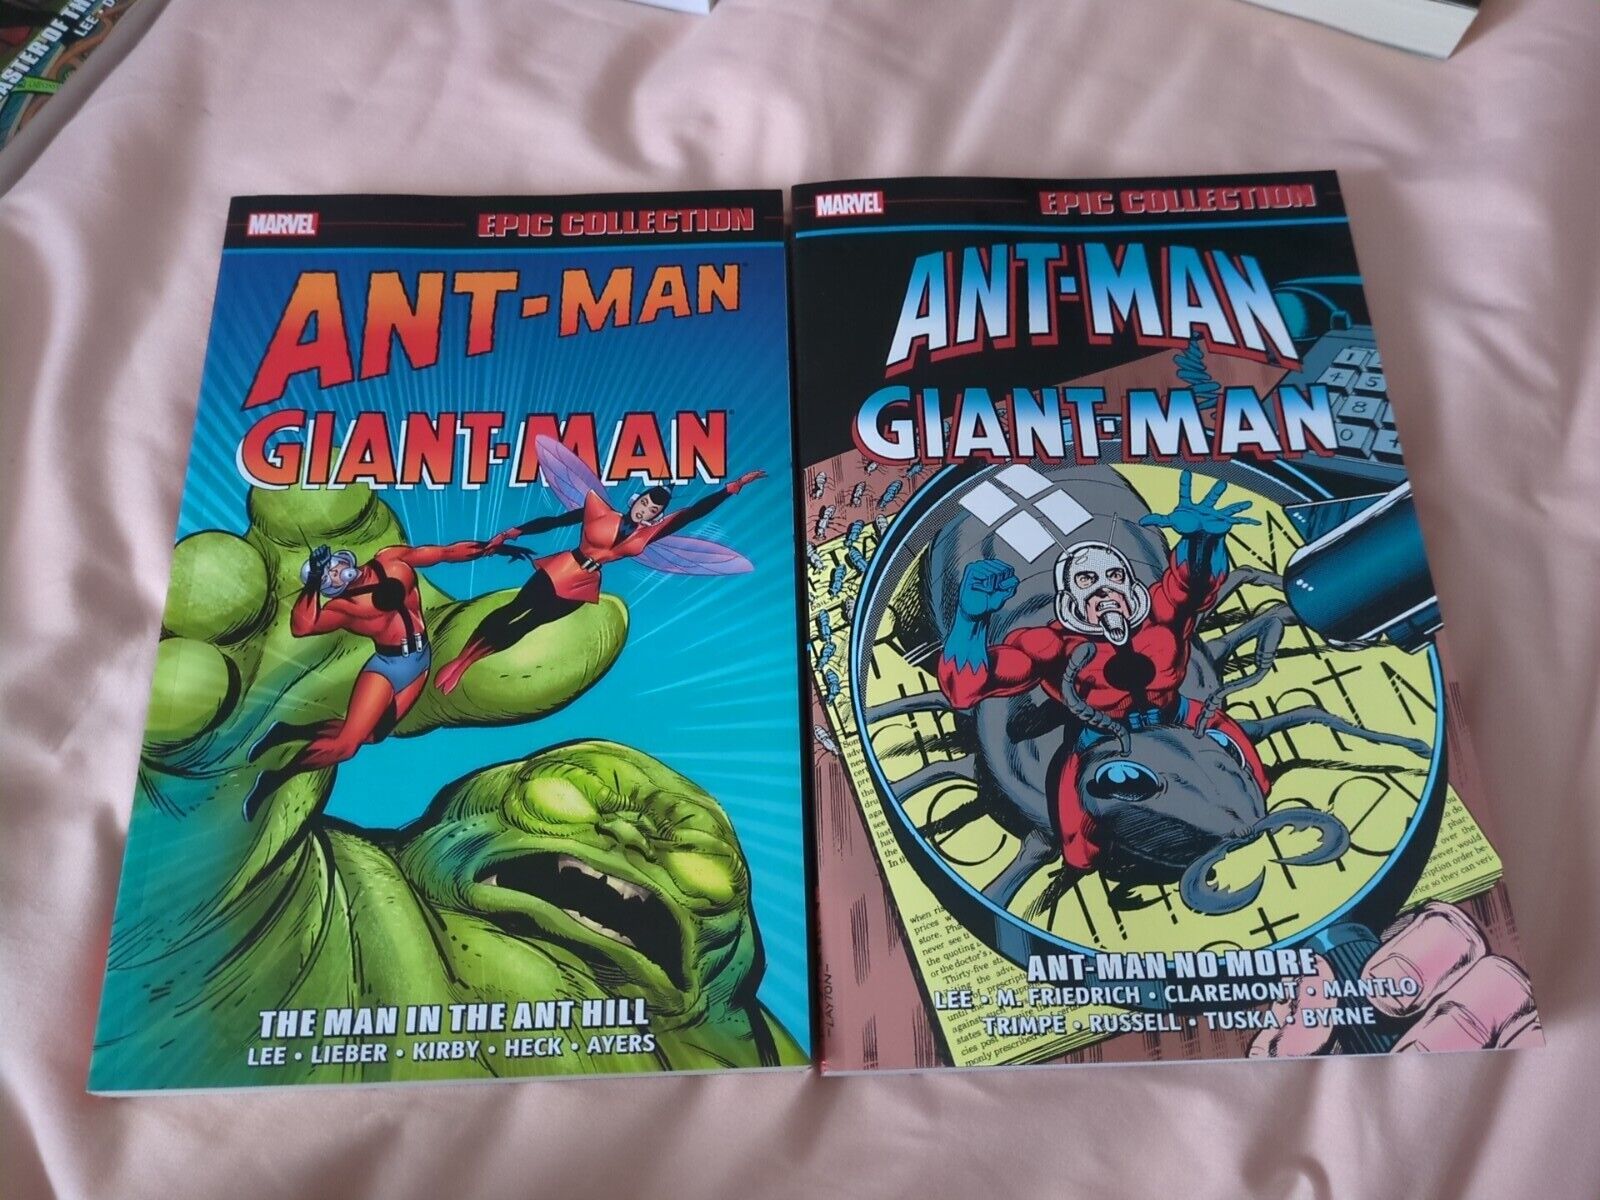 Ant-Man/Giant-Man Epic Collection Vol. 1 & 2 Sc Tpb. 